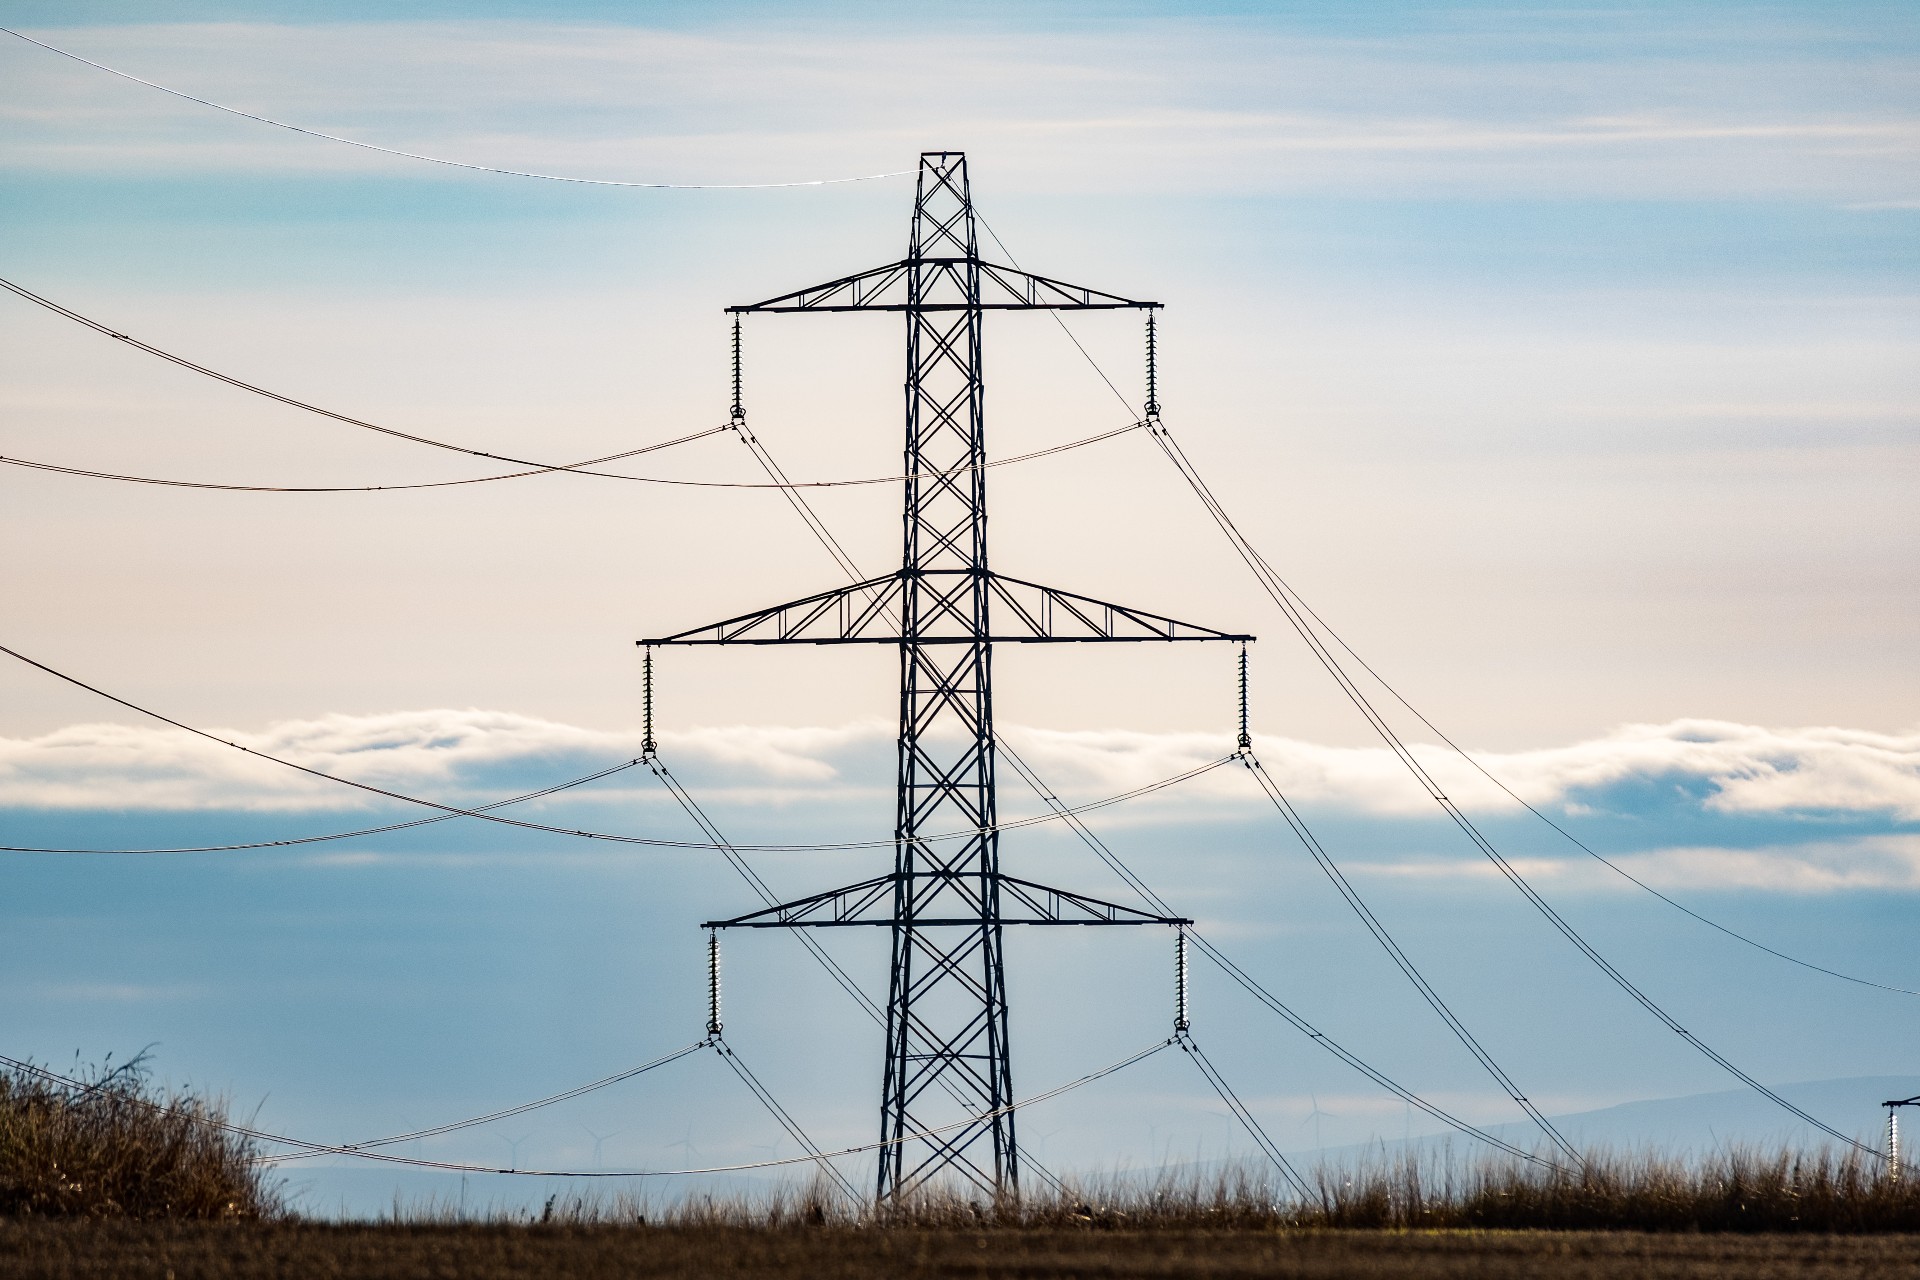 An electricity transmission pylon/tower in front of a pale blue sky filled with clouds